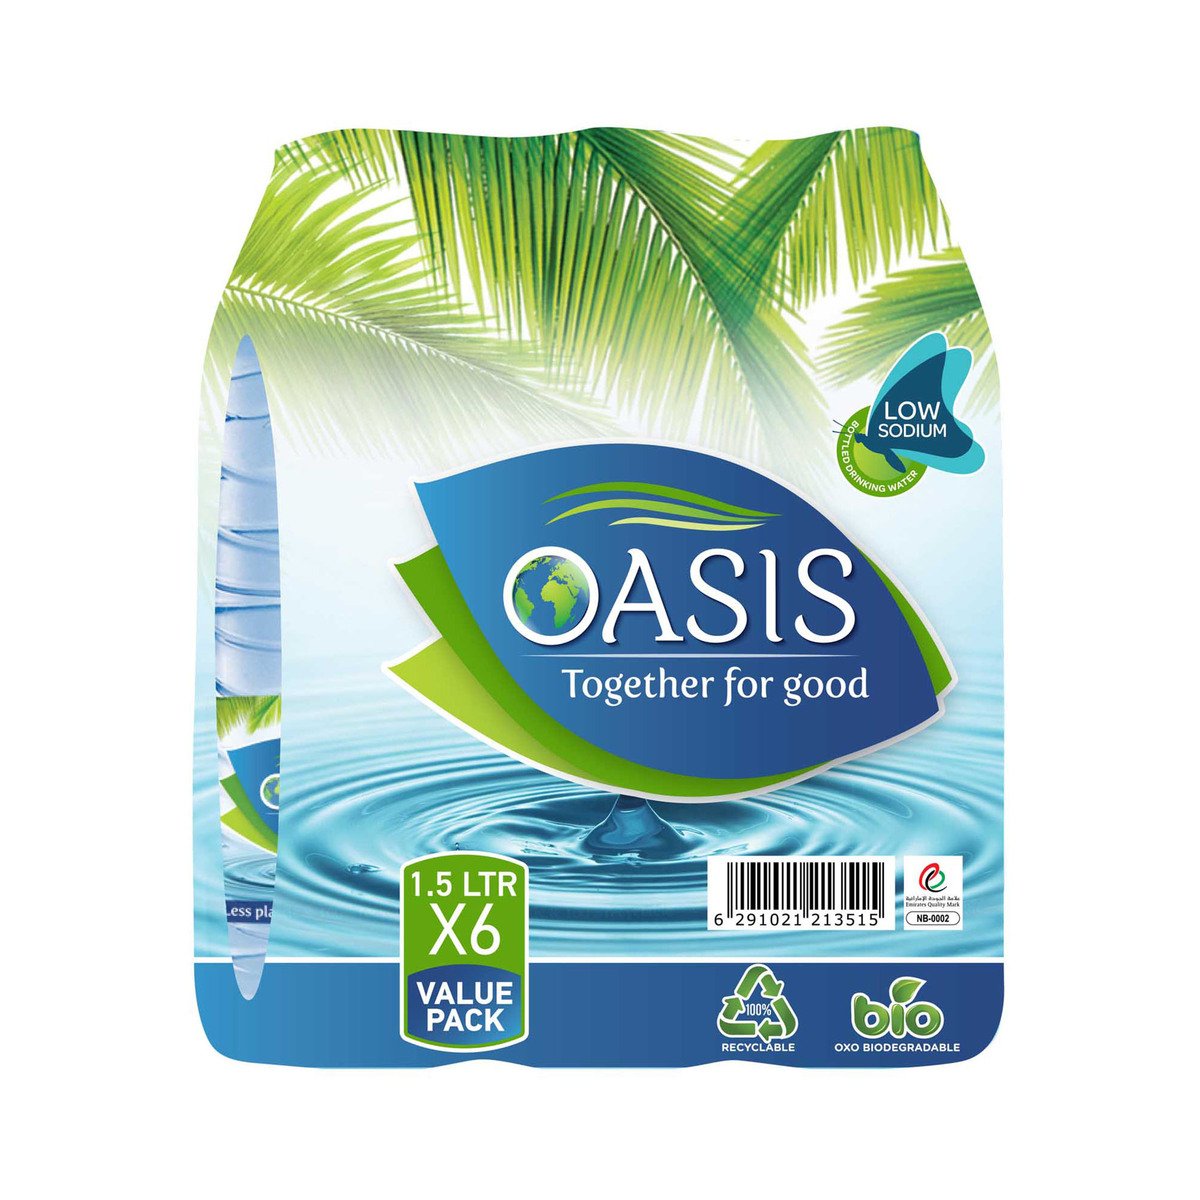 Oasis Bottled Drinking Water 12 x 1.5 Litres